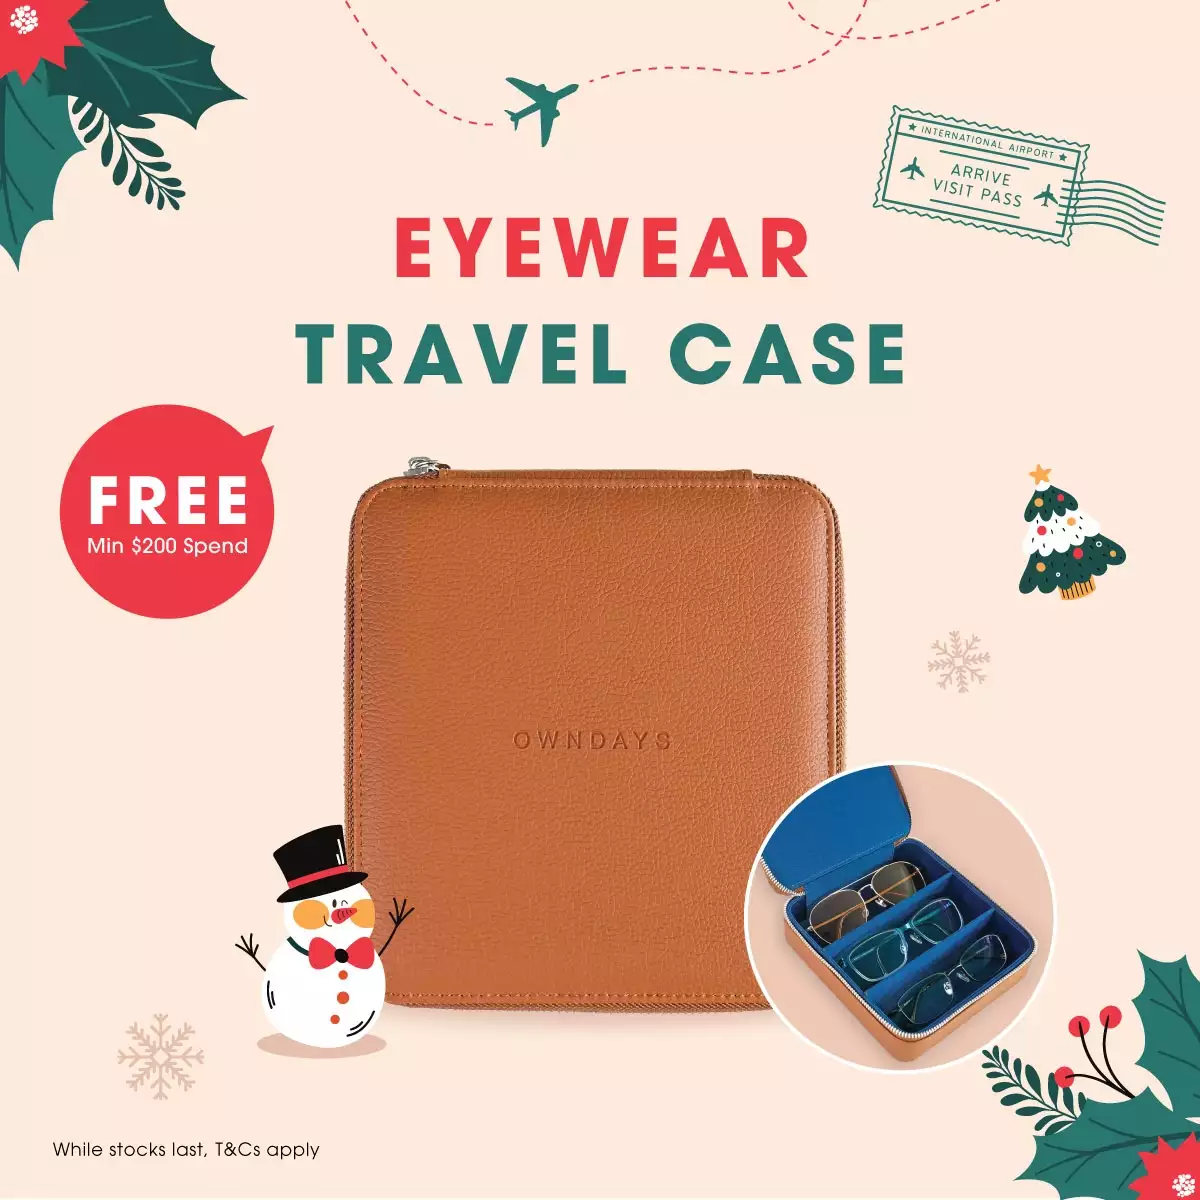 Travel in style with OWNDAYS this festive season